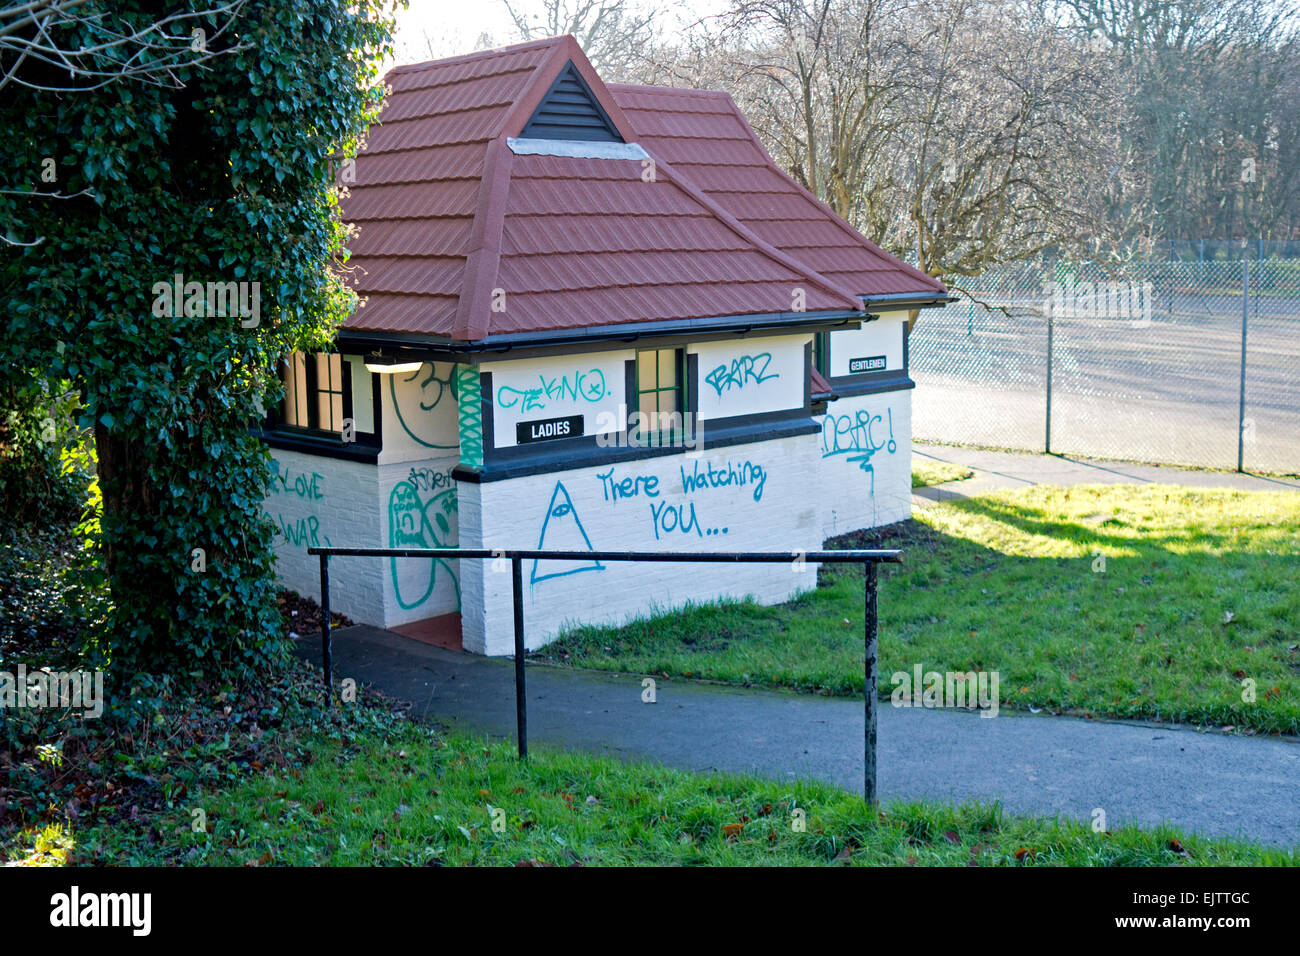 Toilet block in a park covered in poorly spelled graffiti. Stock Photo